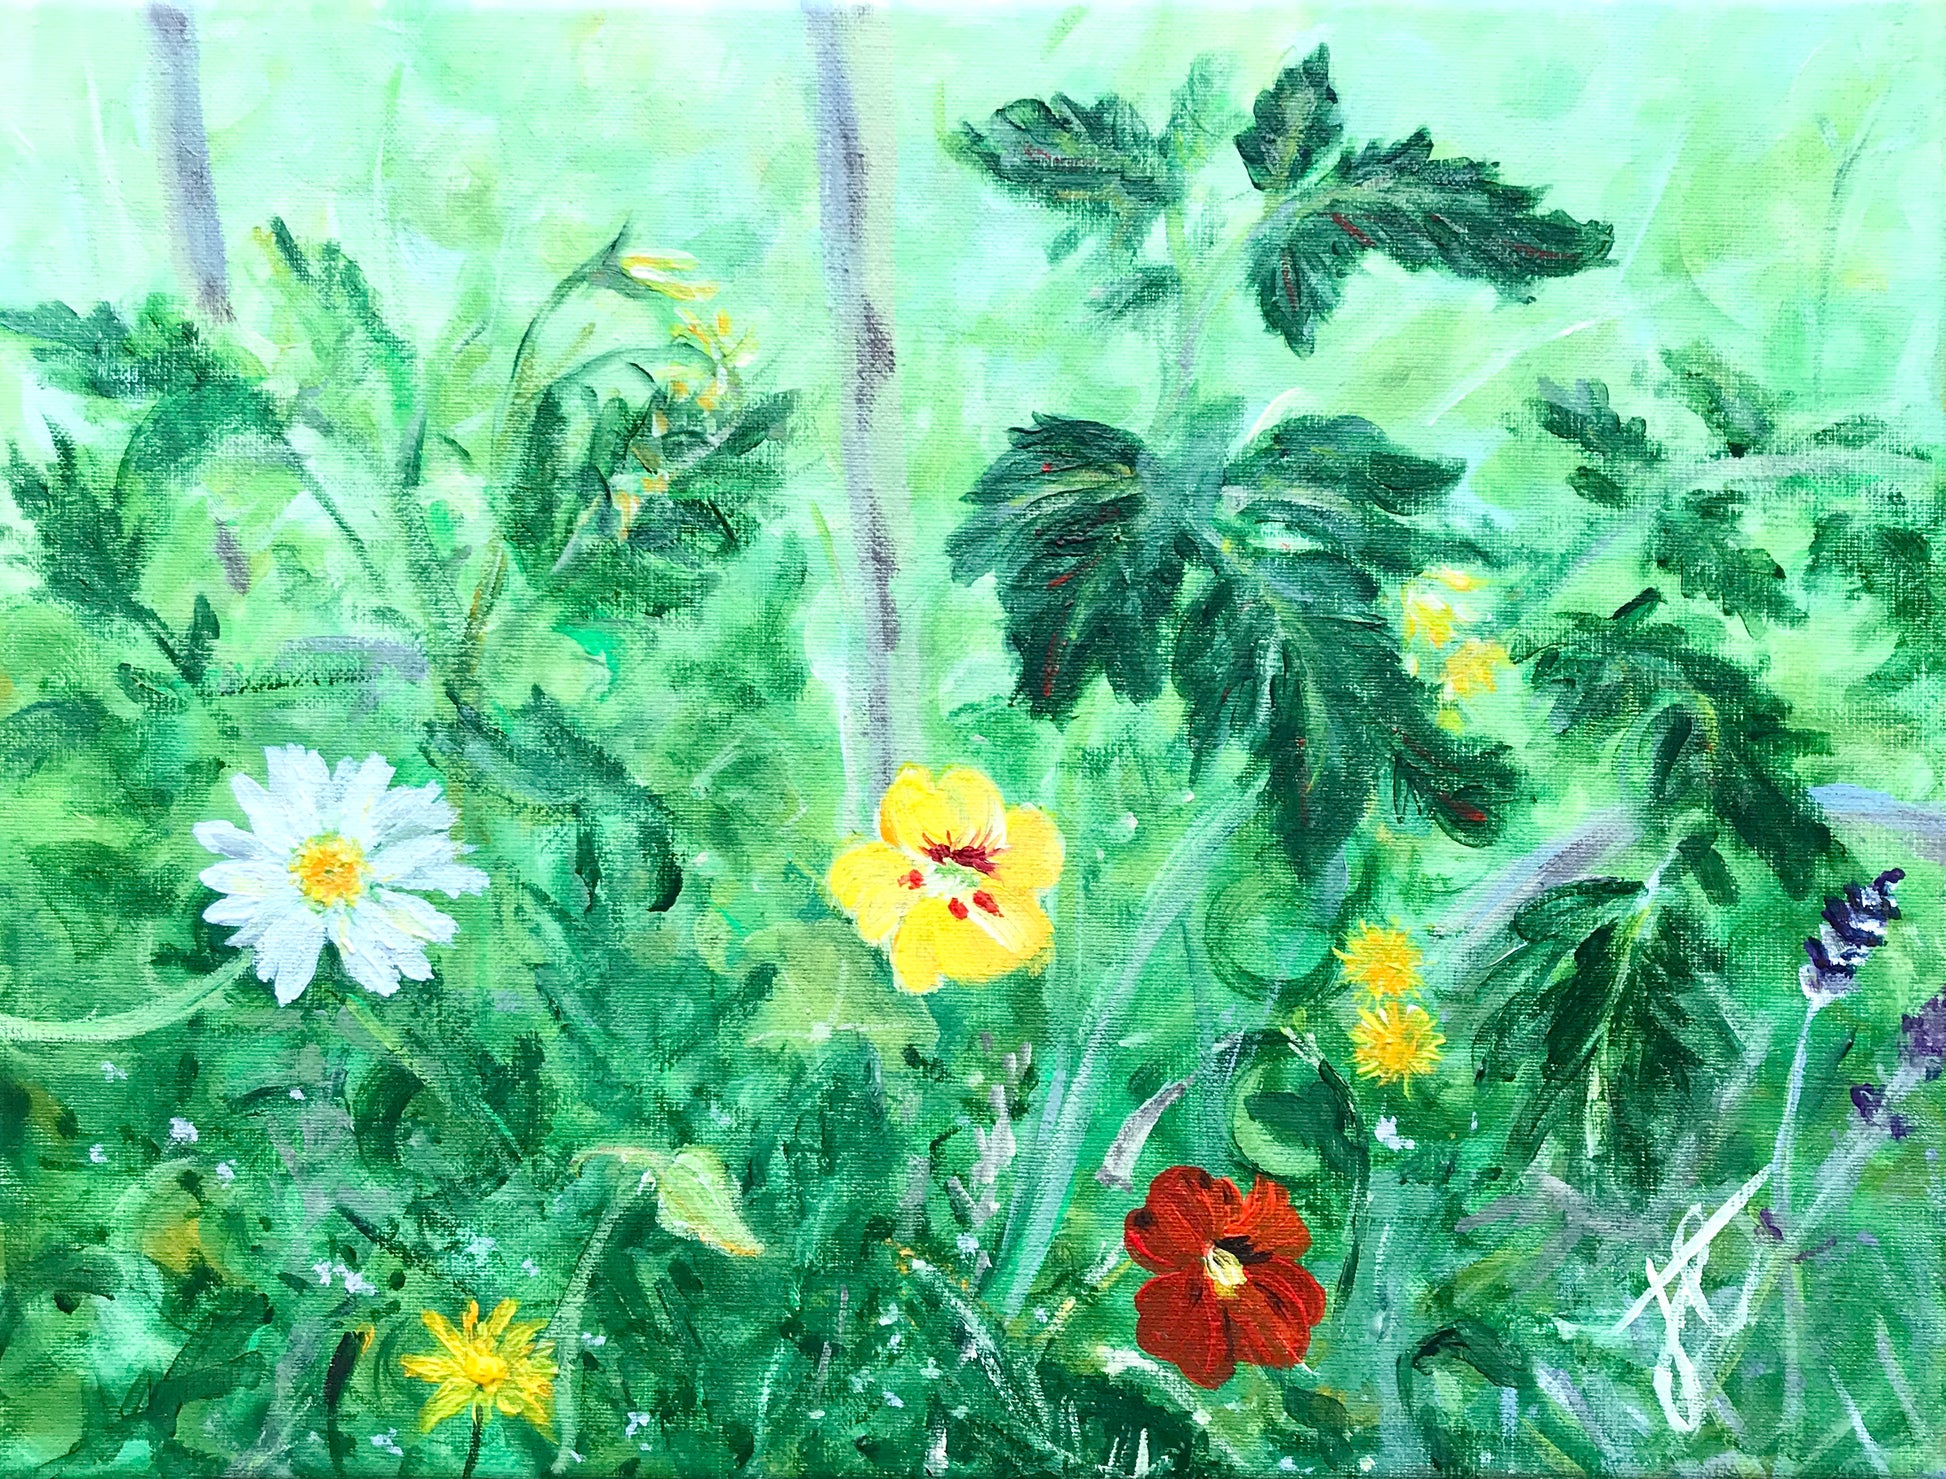 Painting cropped to edge: tomato plants growing against a green background. There are a few canes visible. Some yellow buds are on some of the tomato plants.  A daisy, some dandelions and nasturtiums and lavender flowers grow amidst the green.